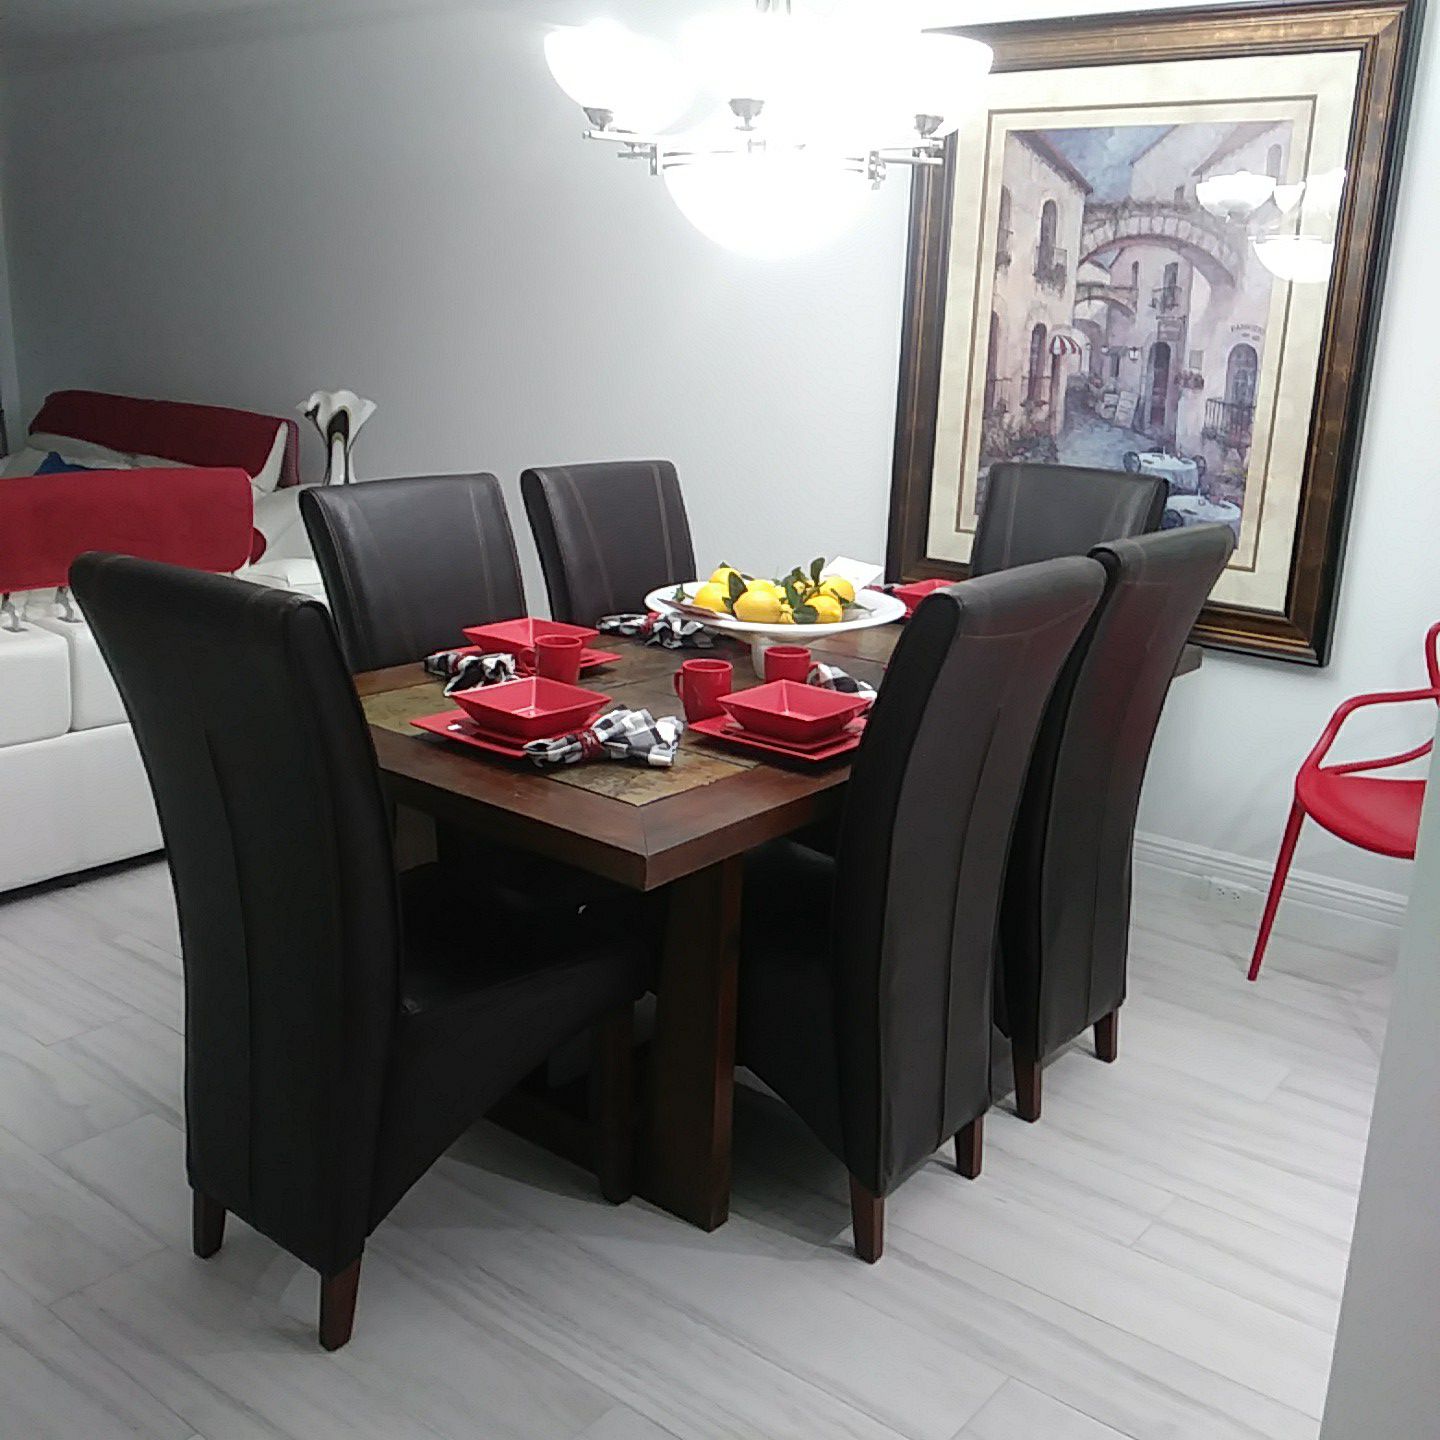 Solid oak dining room table and leather chairs